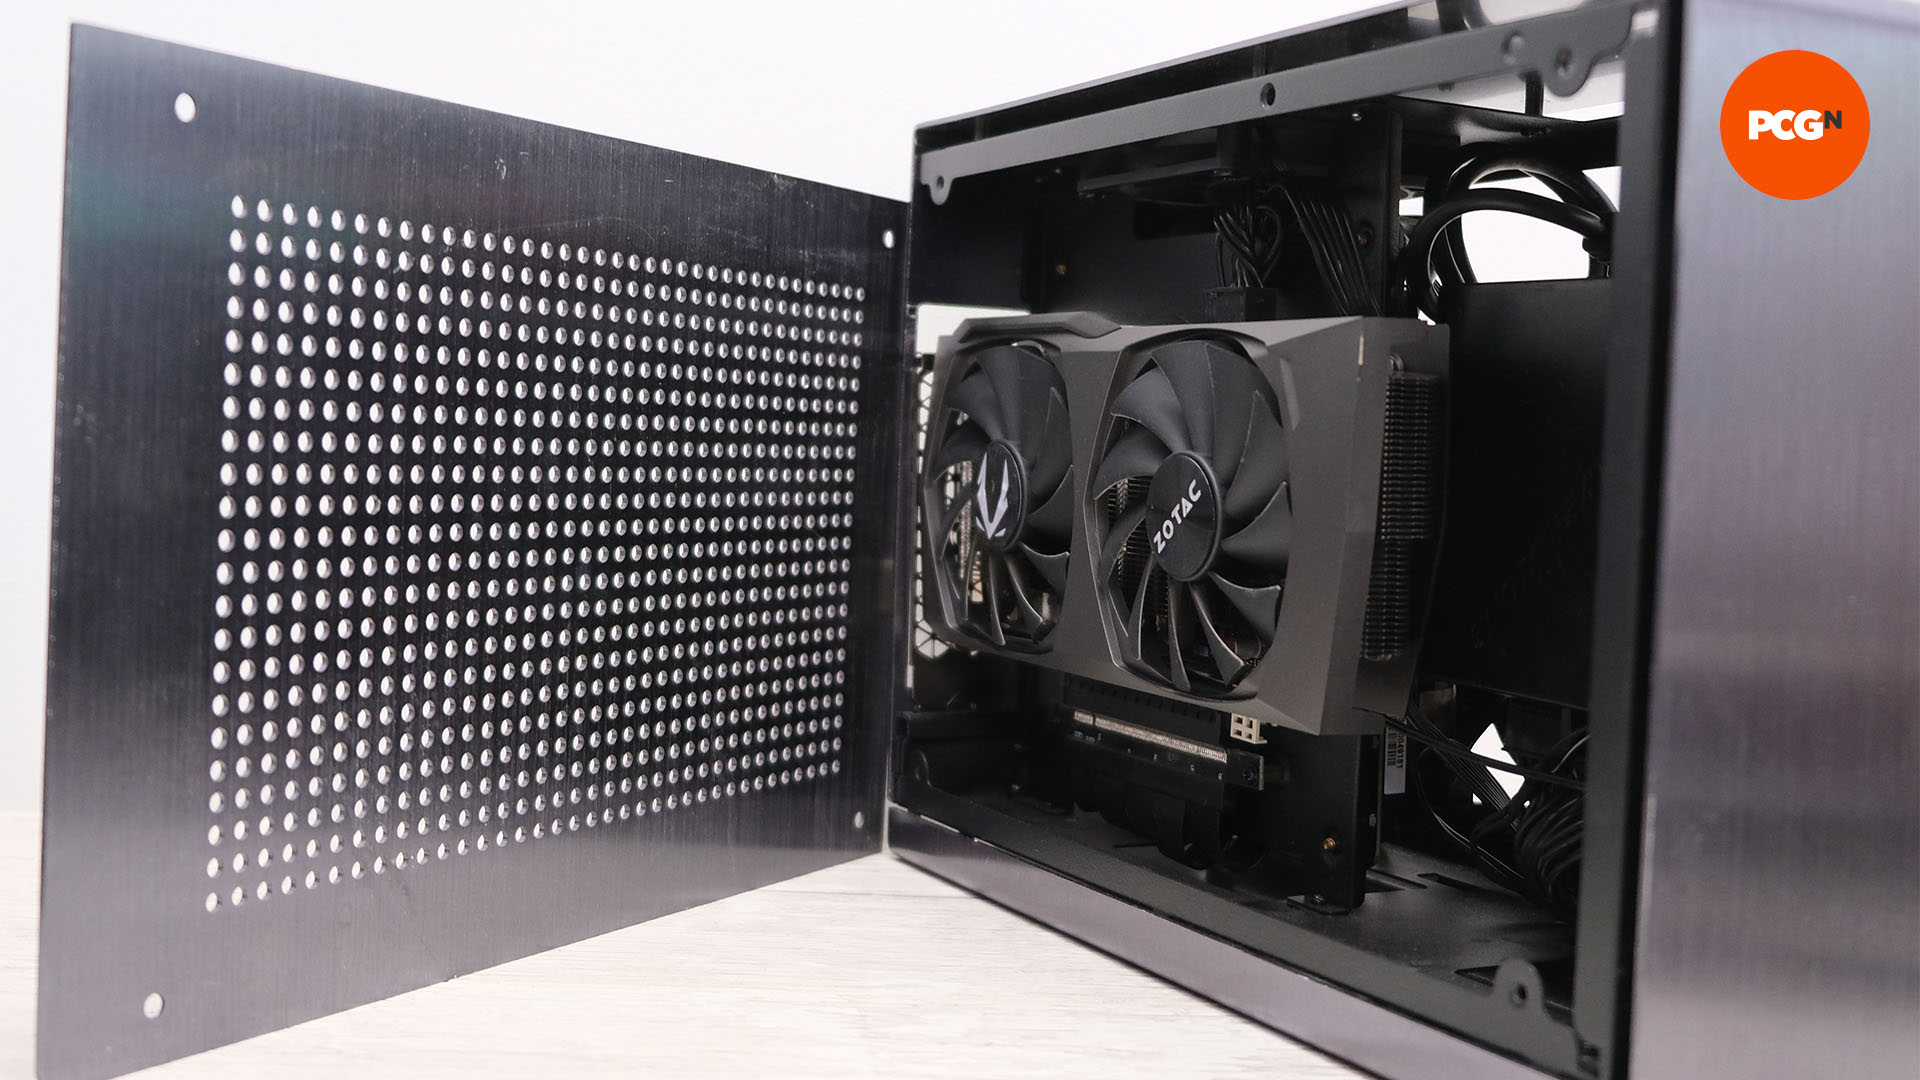 To help with PC cooling, a GPU in a mini ITX is pointing facing out towards a mesh cover